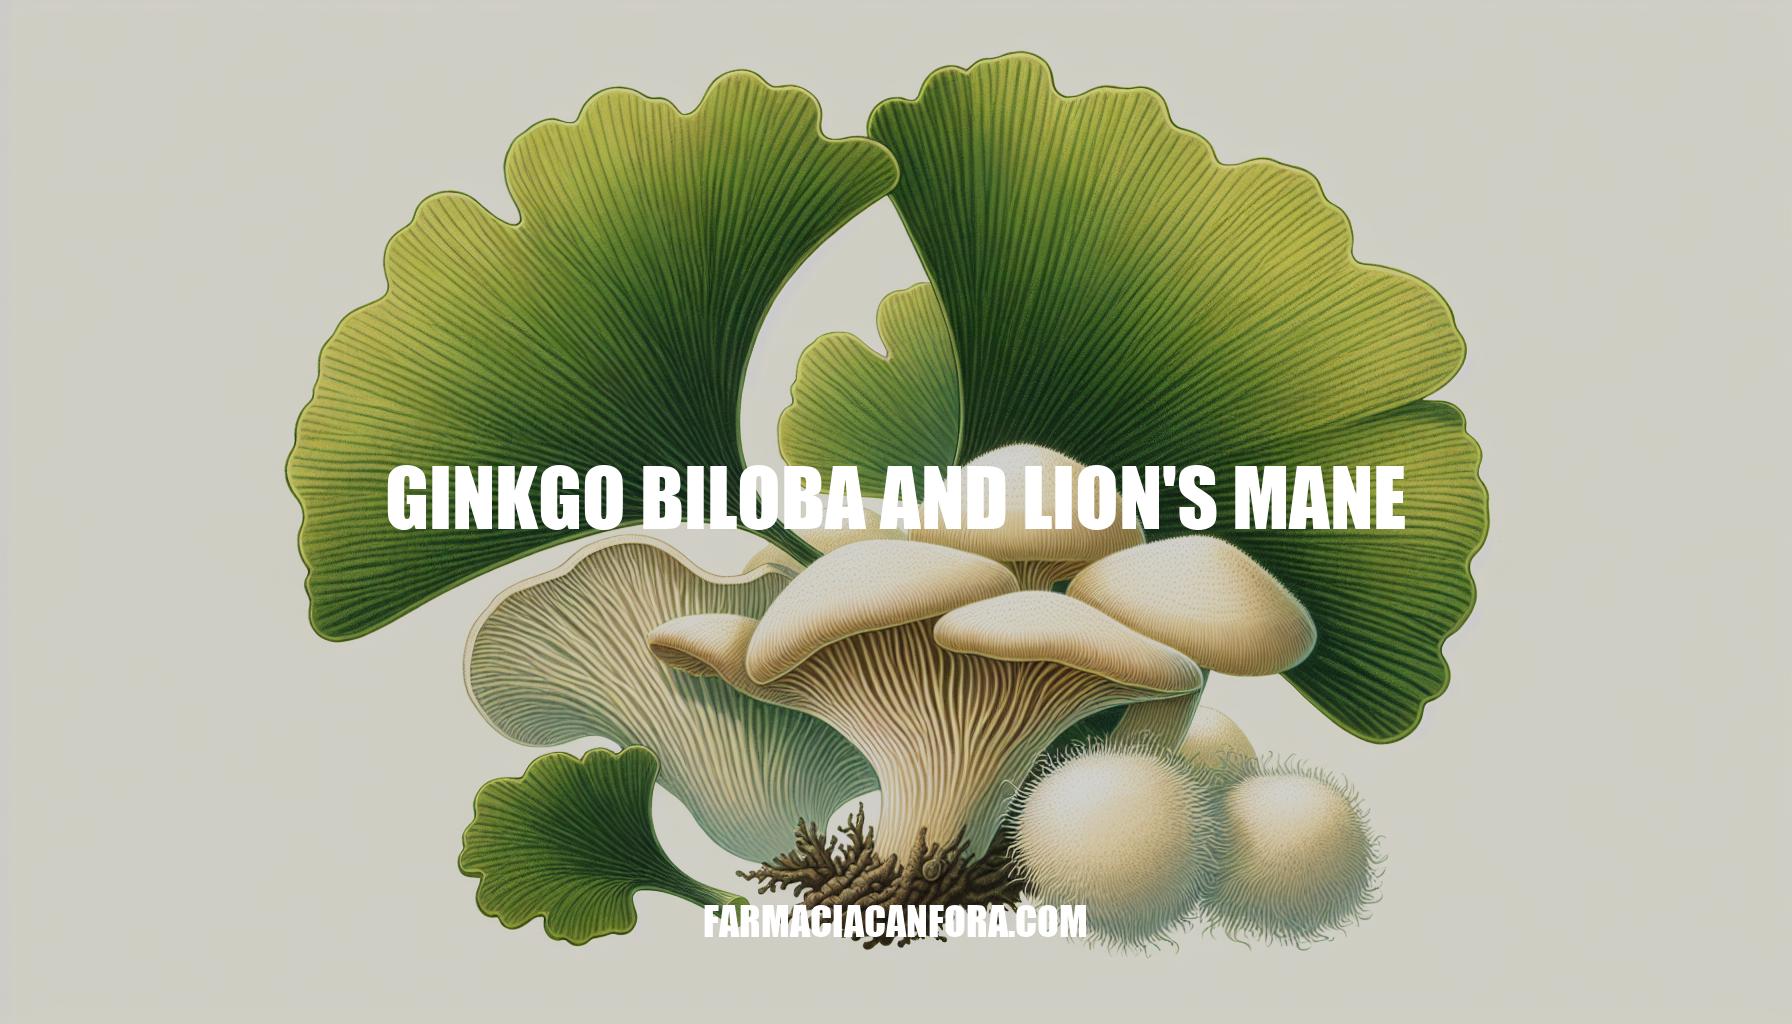 Ginkgo Biloba and Lion's Mane: Herbal Supplements for Cognitive Health